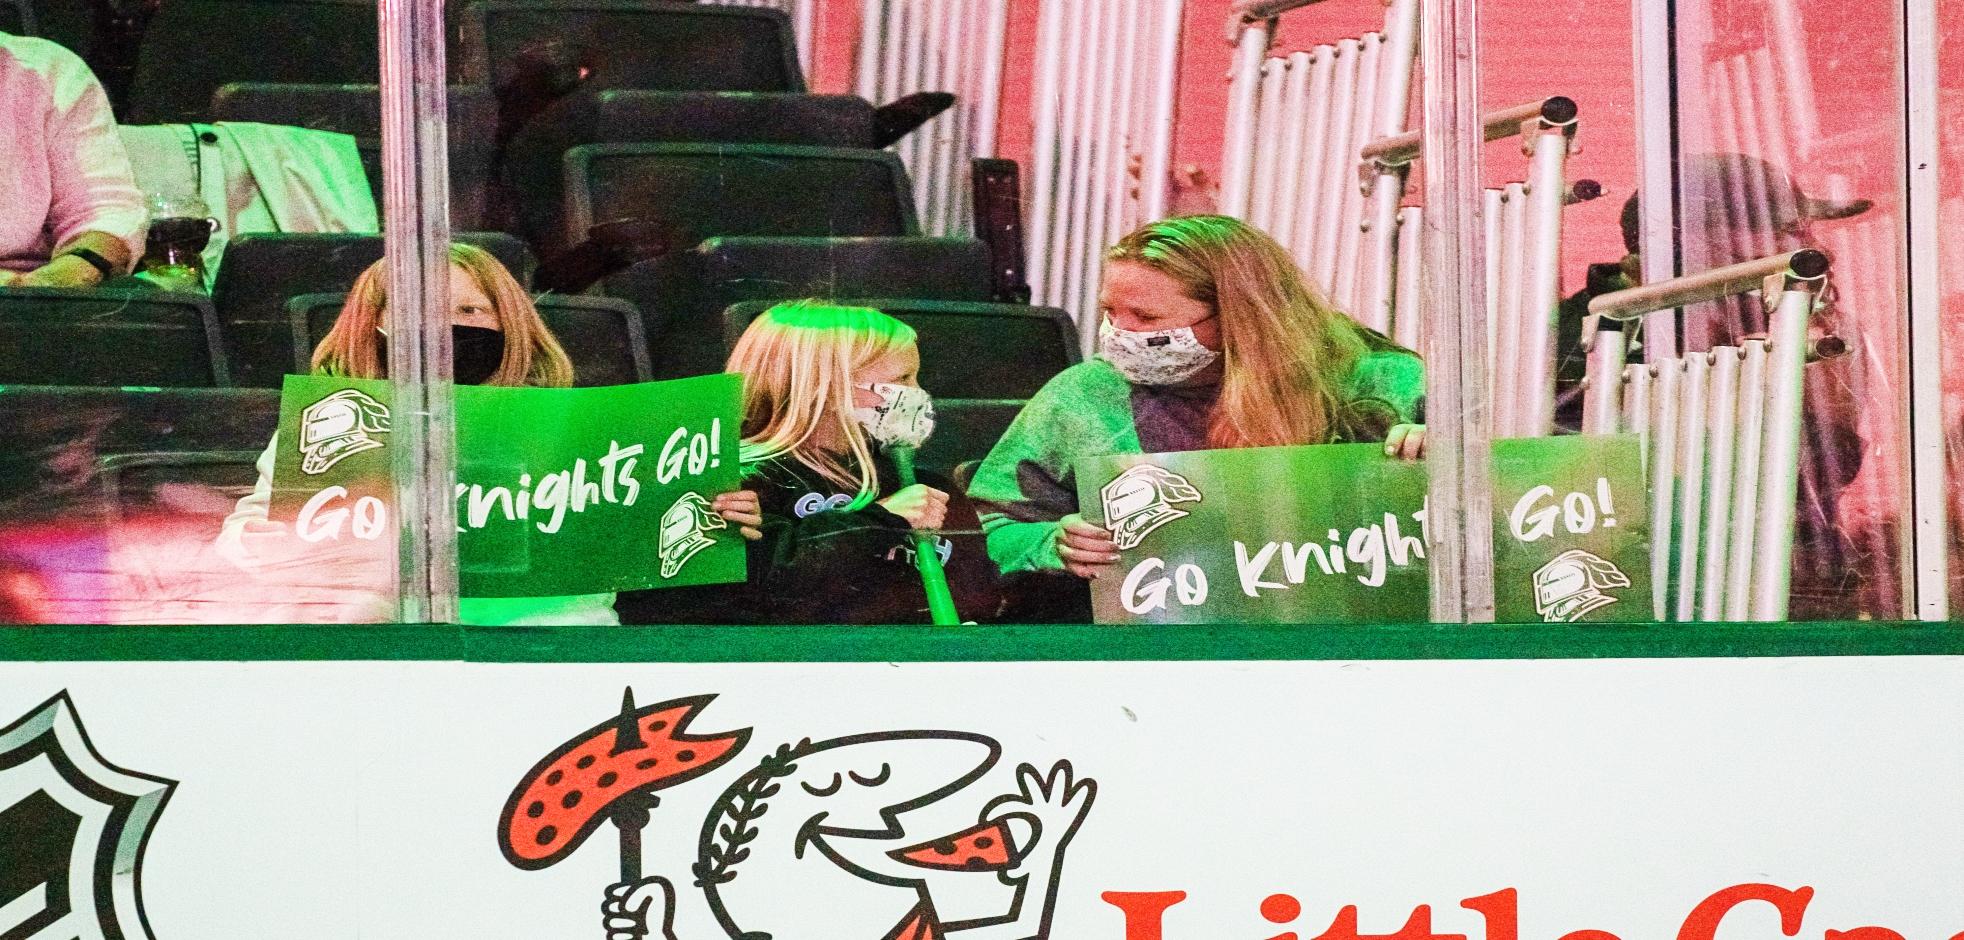 Fans cheering on the London Knights at Budweiser Gardens in London, ON.